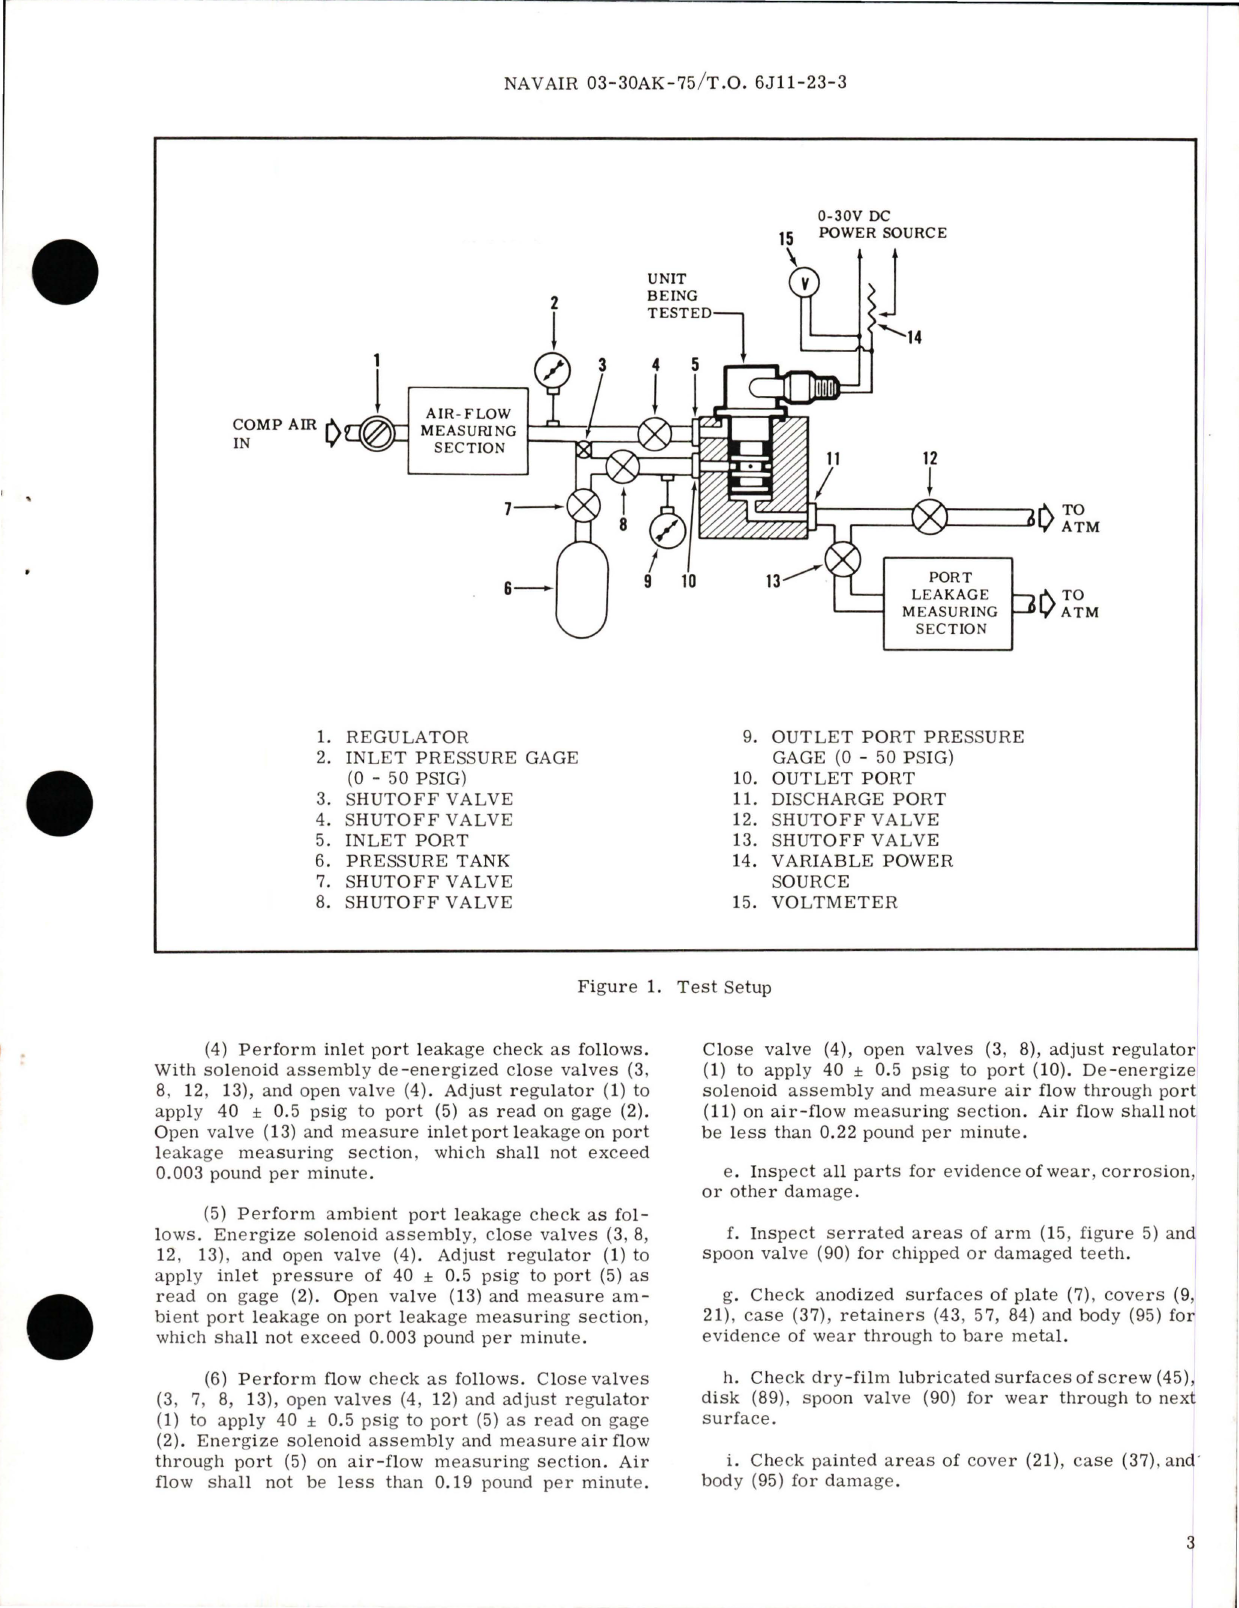 Sample page 5 from AirCorps Library document: Overhaul Instructions with Parts Breakdown for Air Pressure Regulators - Parts 108388, 108388-1-1, and 108388-2-1